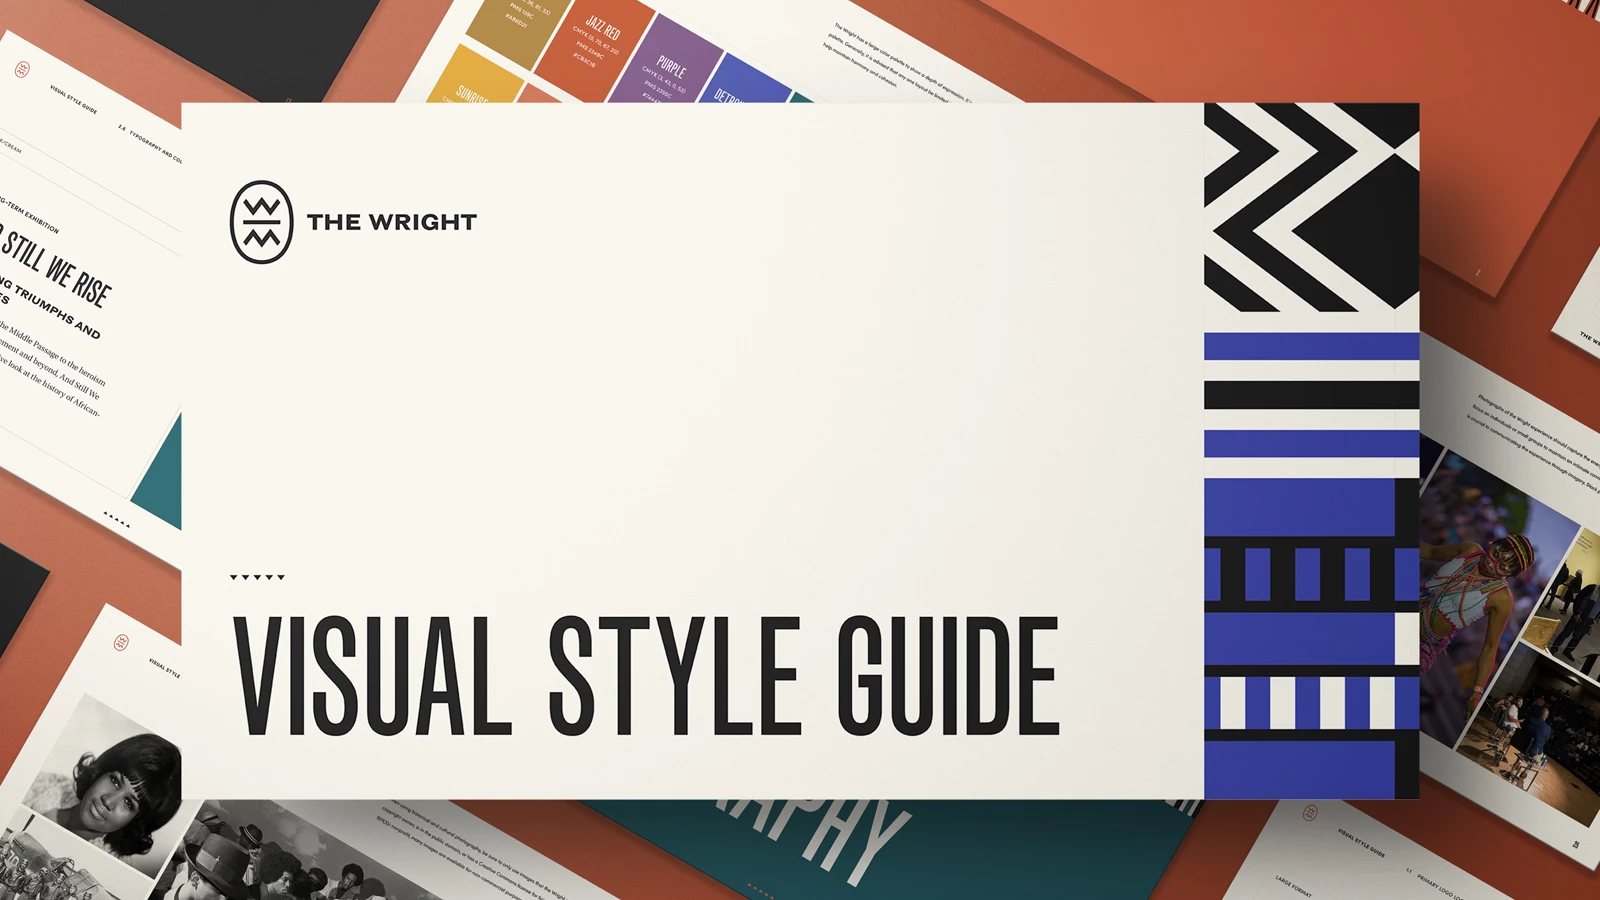 The Wright Visual Style Guide